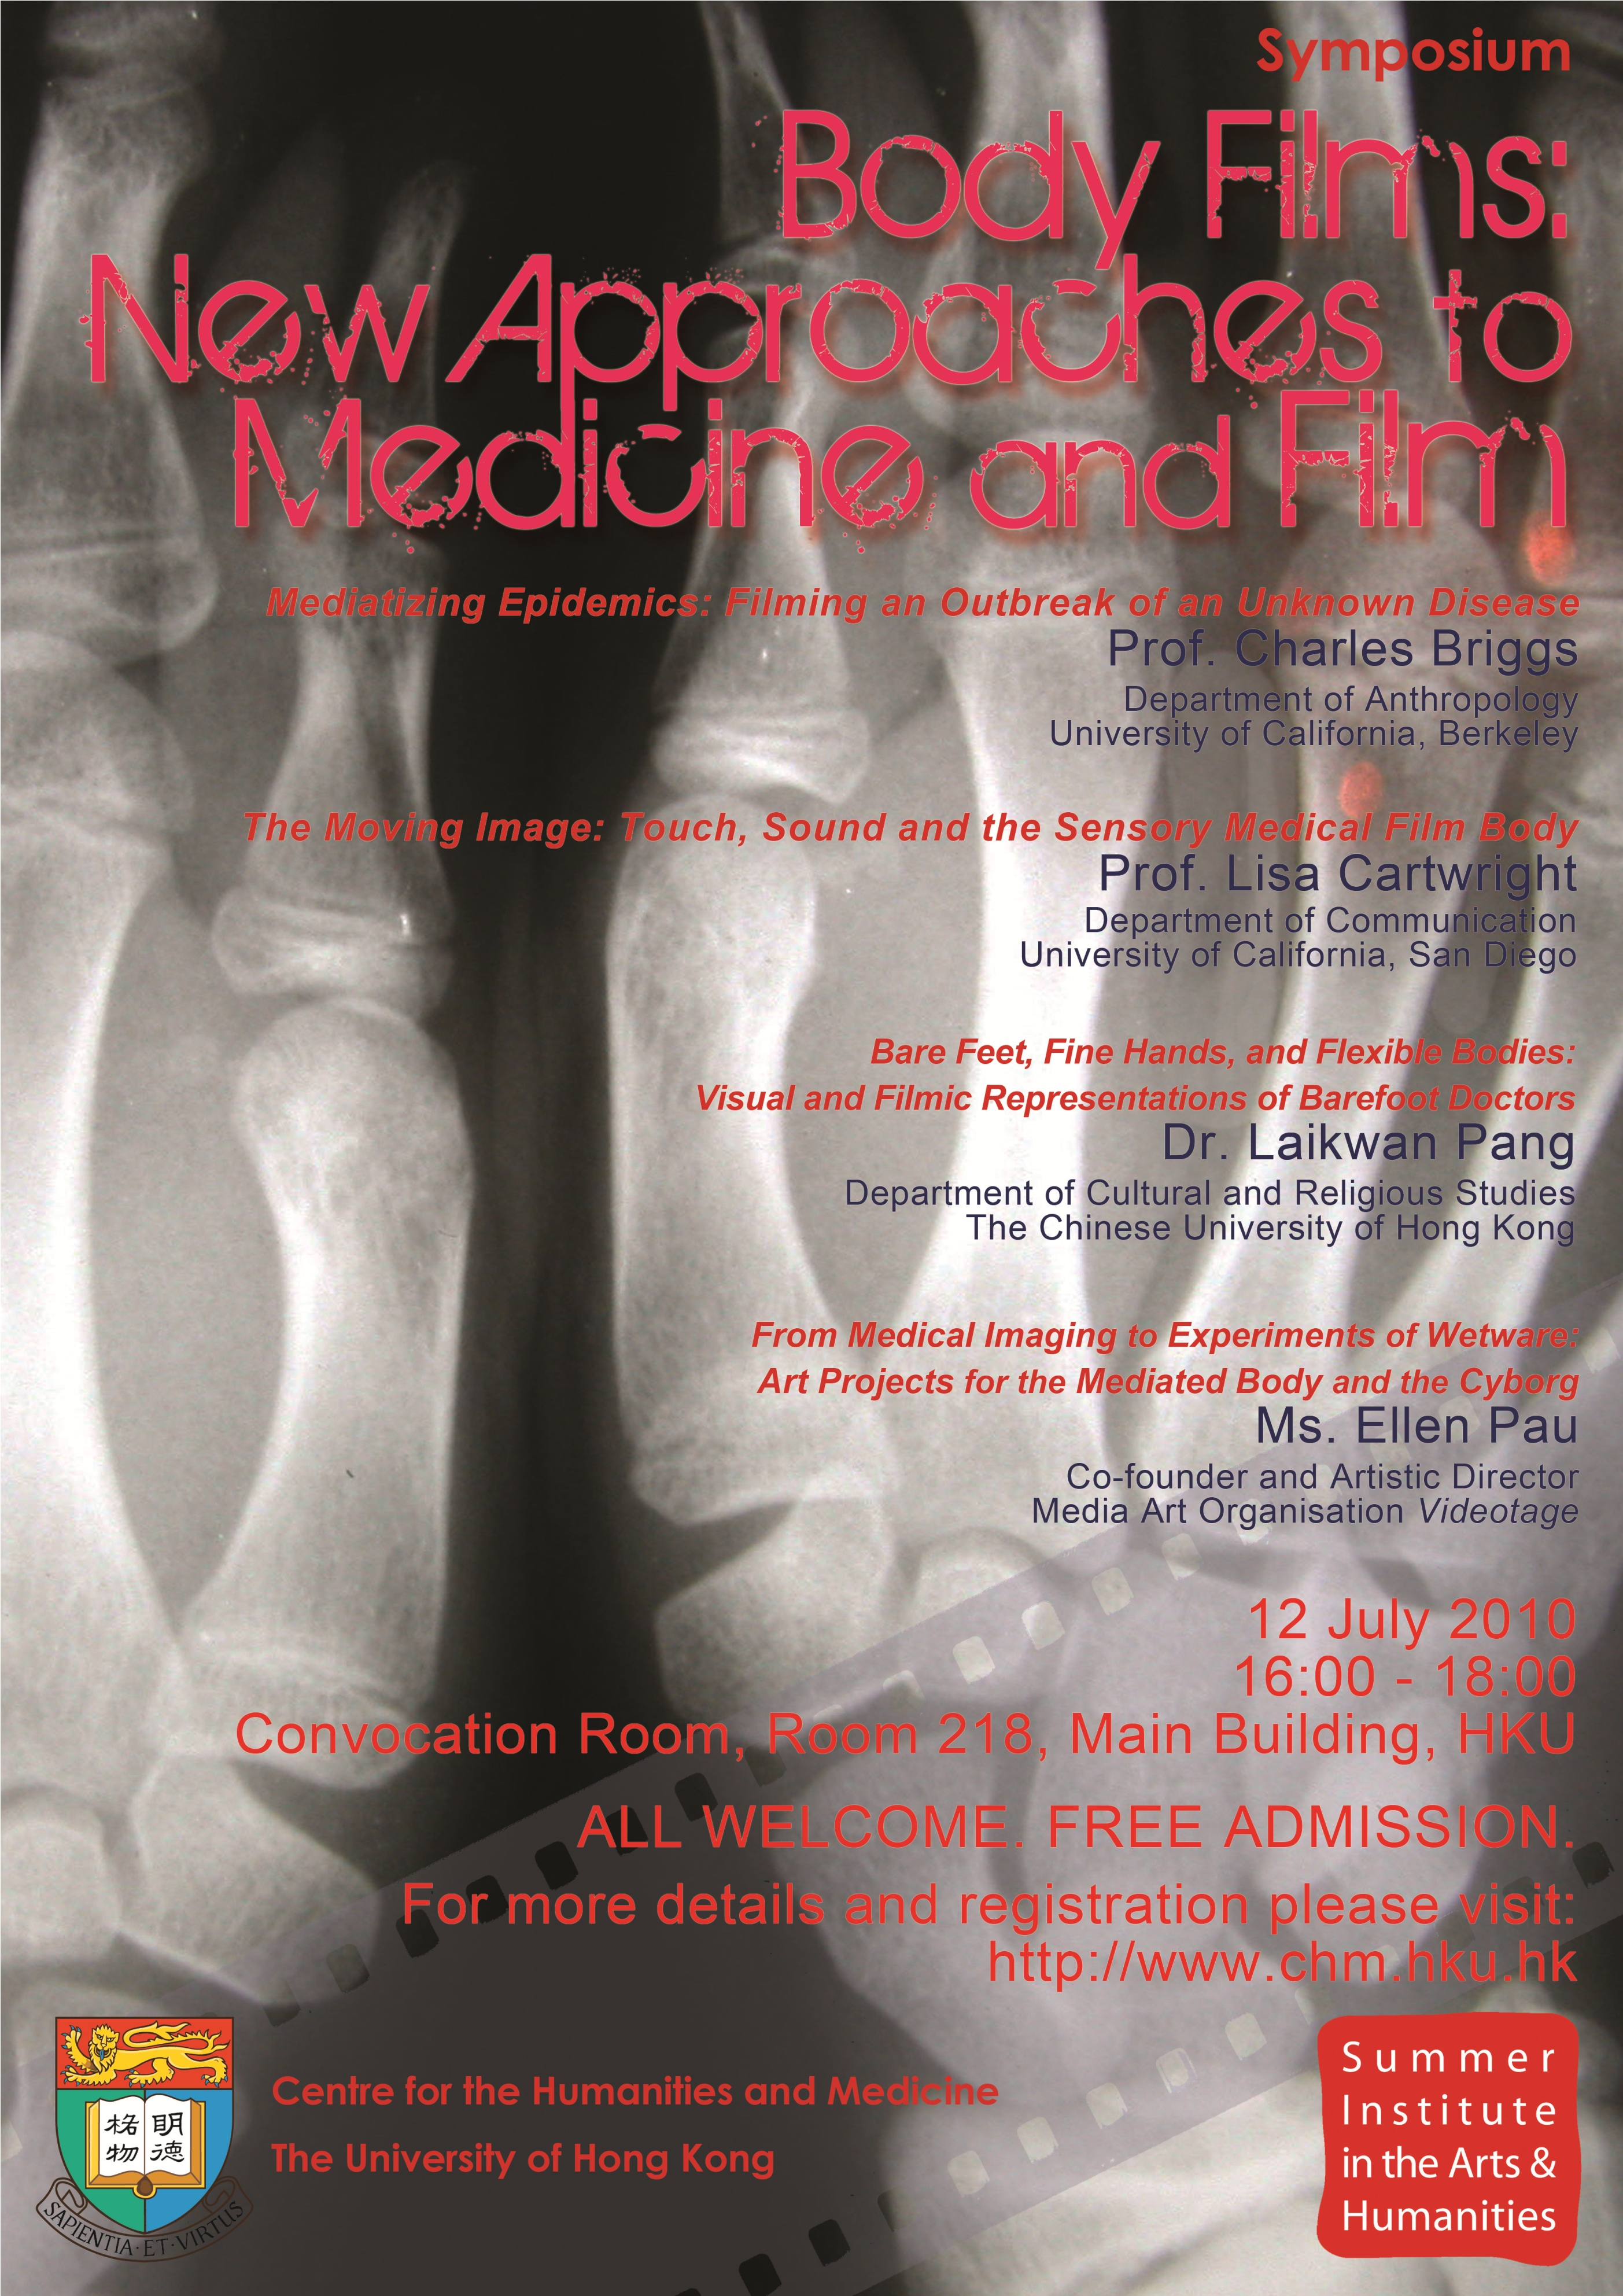 Body Films: New Approaches to Medicine and Film